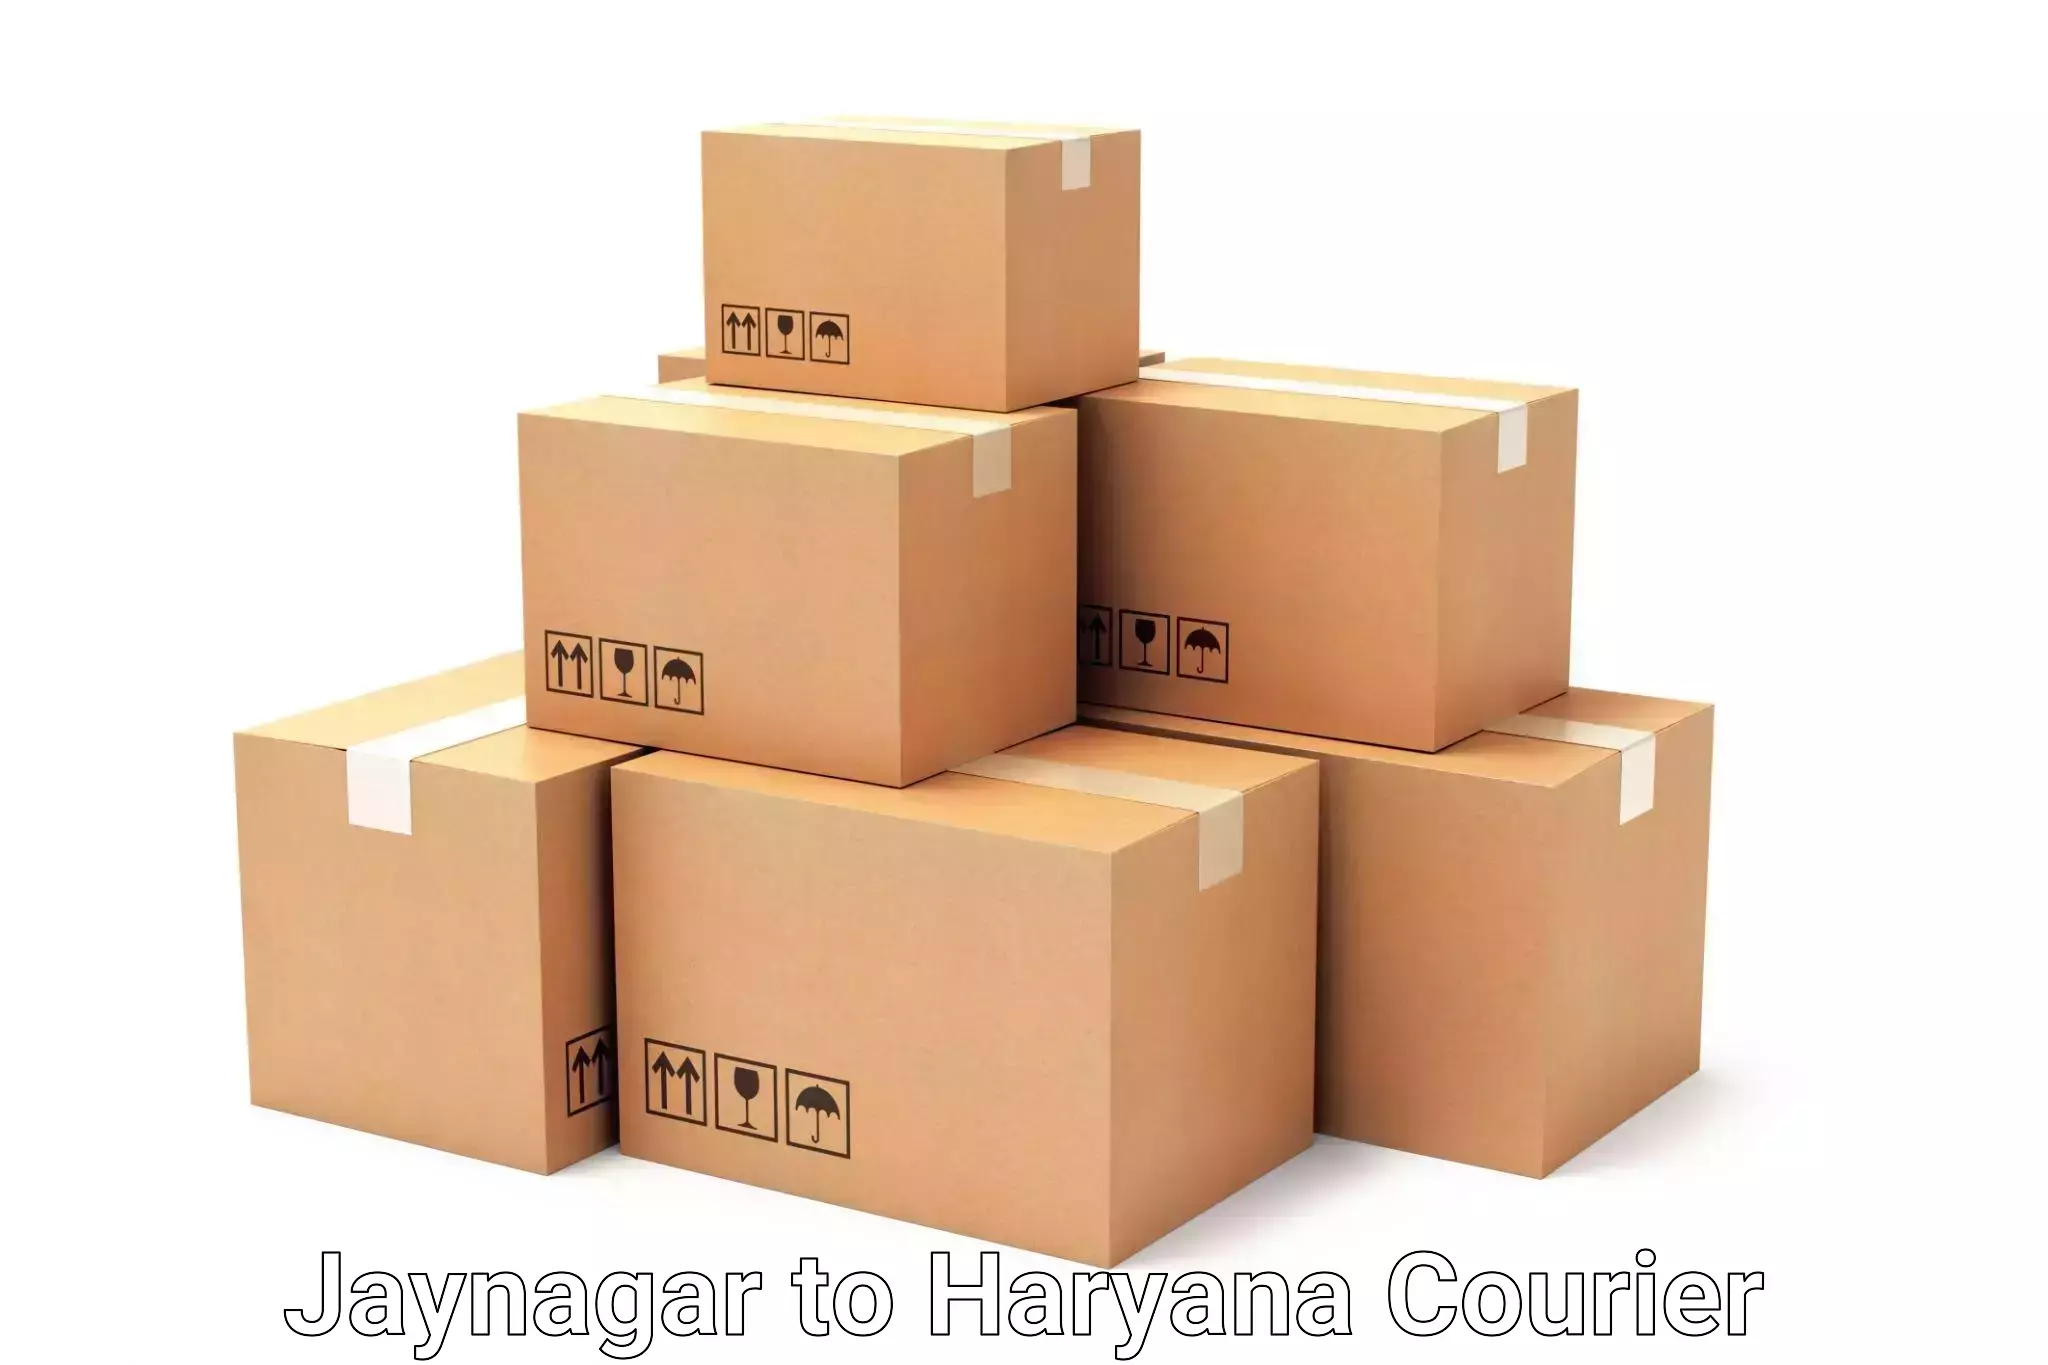 Baggage delivery technology Jaynagar to NCR Haryana